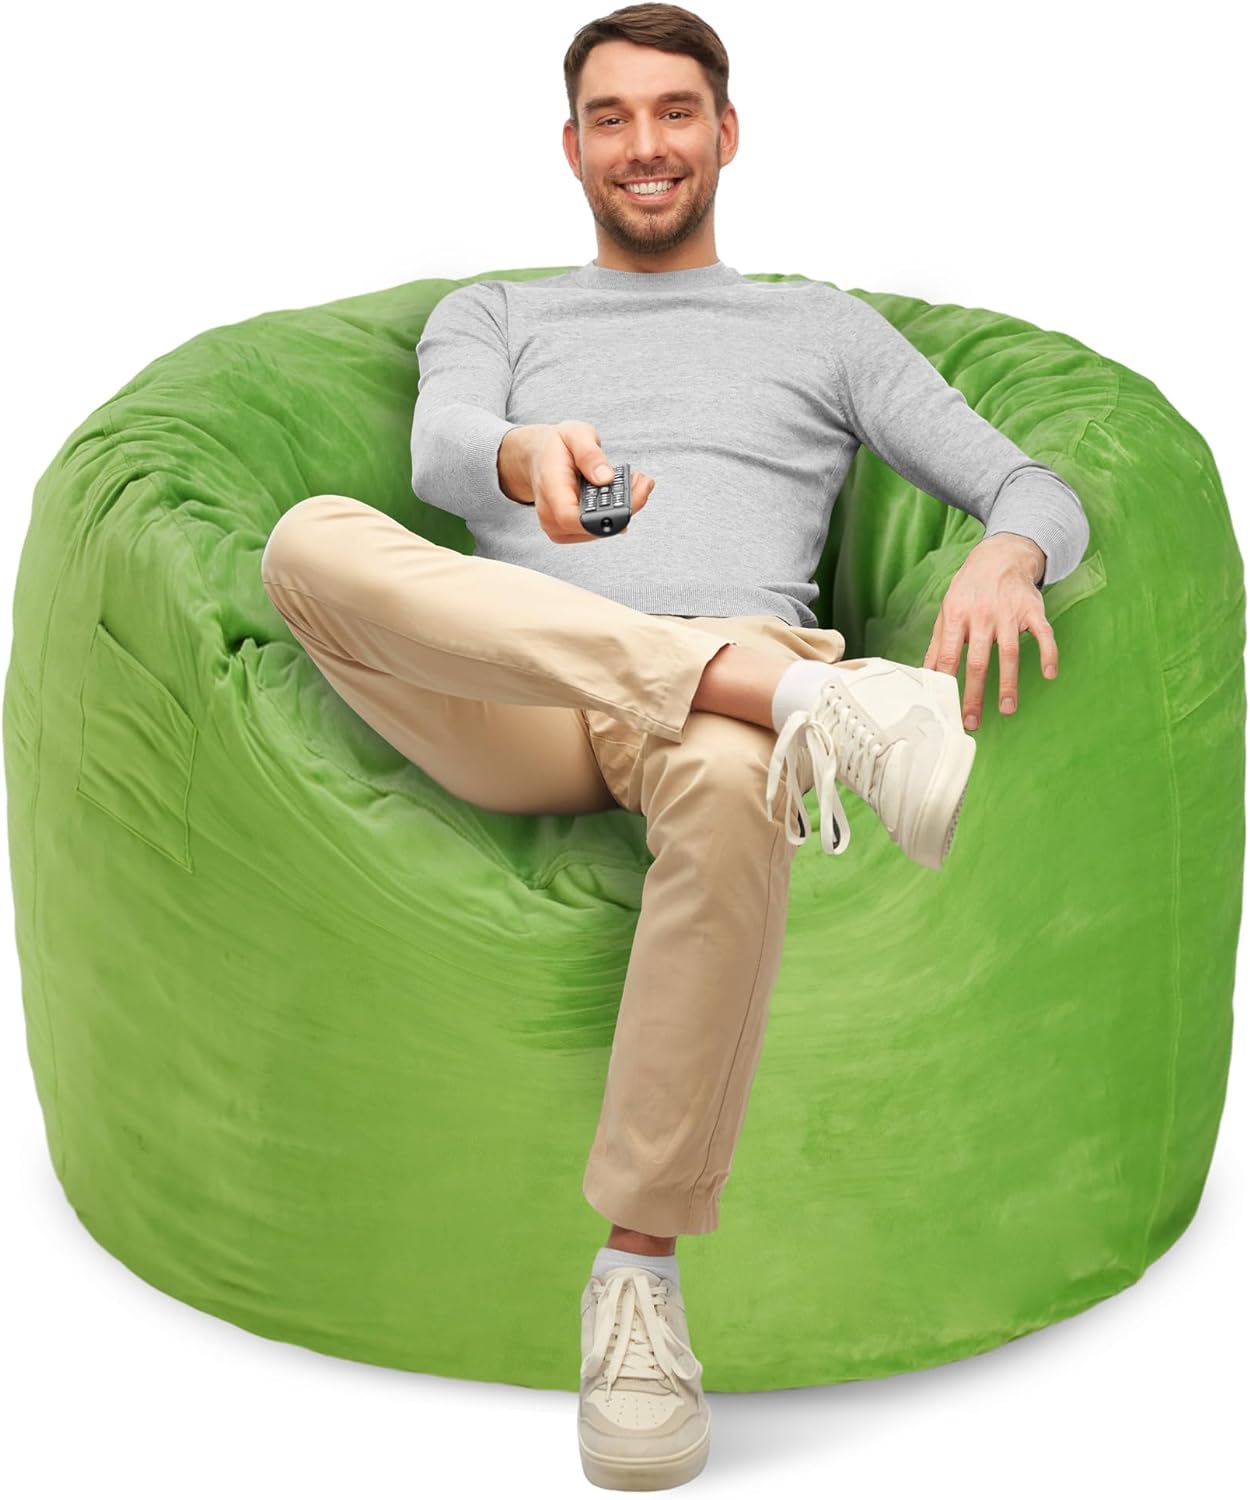 Homguava Bean Bag Chair 3' Bean Bags with Memory Foam Filled, Large Beanbag Chairs Soft Sofa with Dutch Velet Cover-36×36"×24"(Lime)